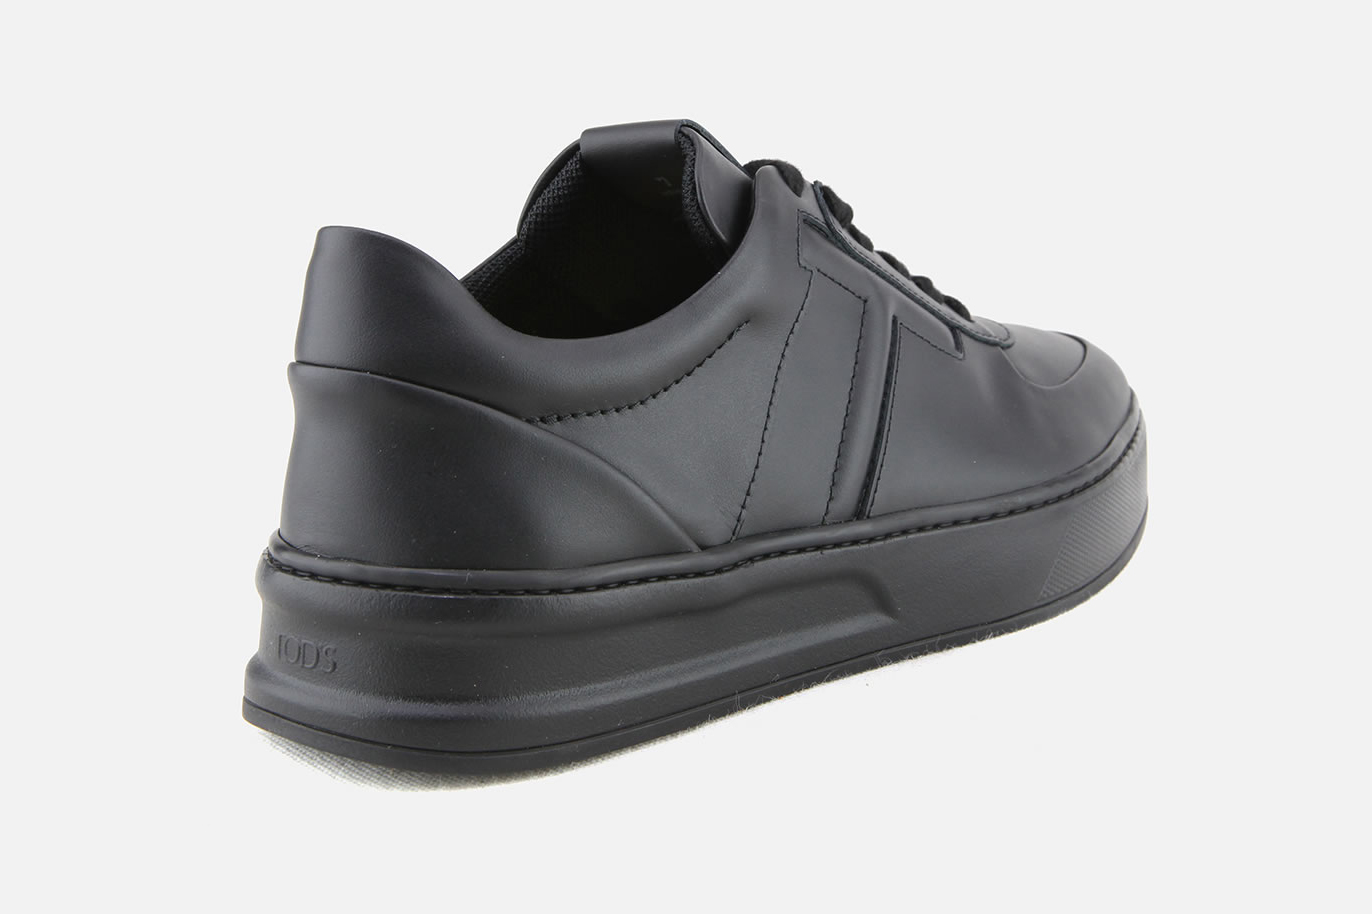 TODS CASSETTA 79 ALL BLACK Sneakers 